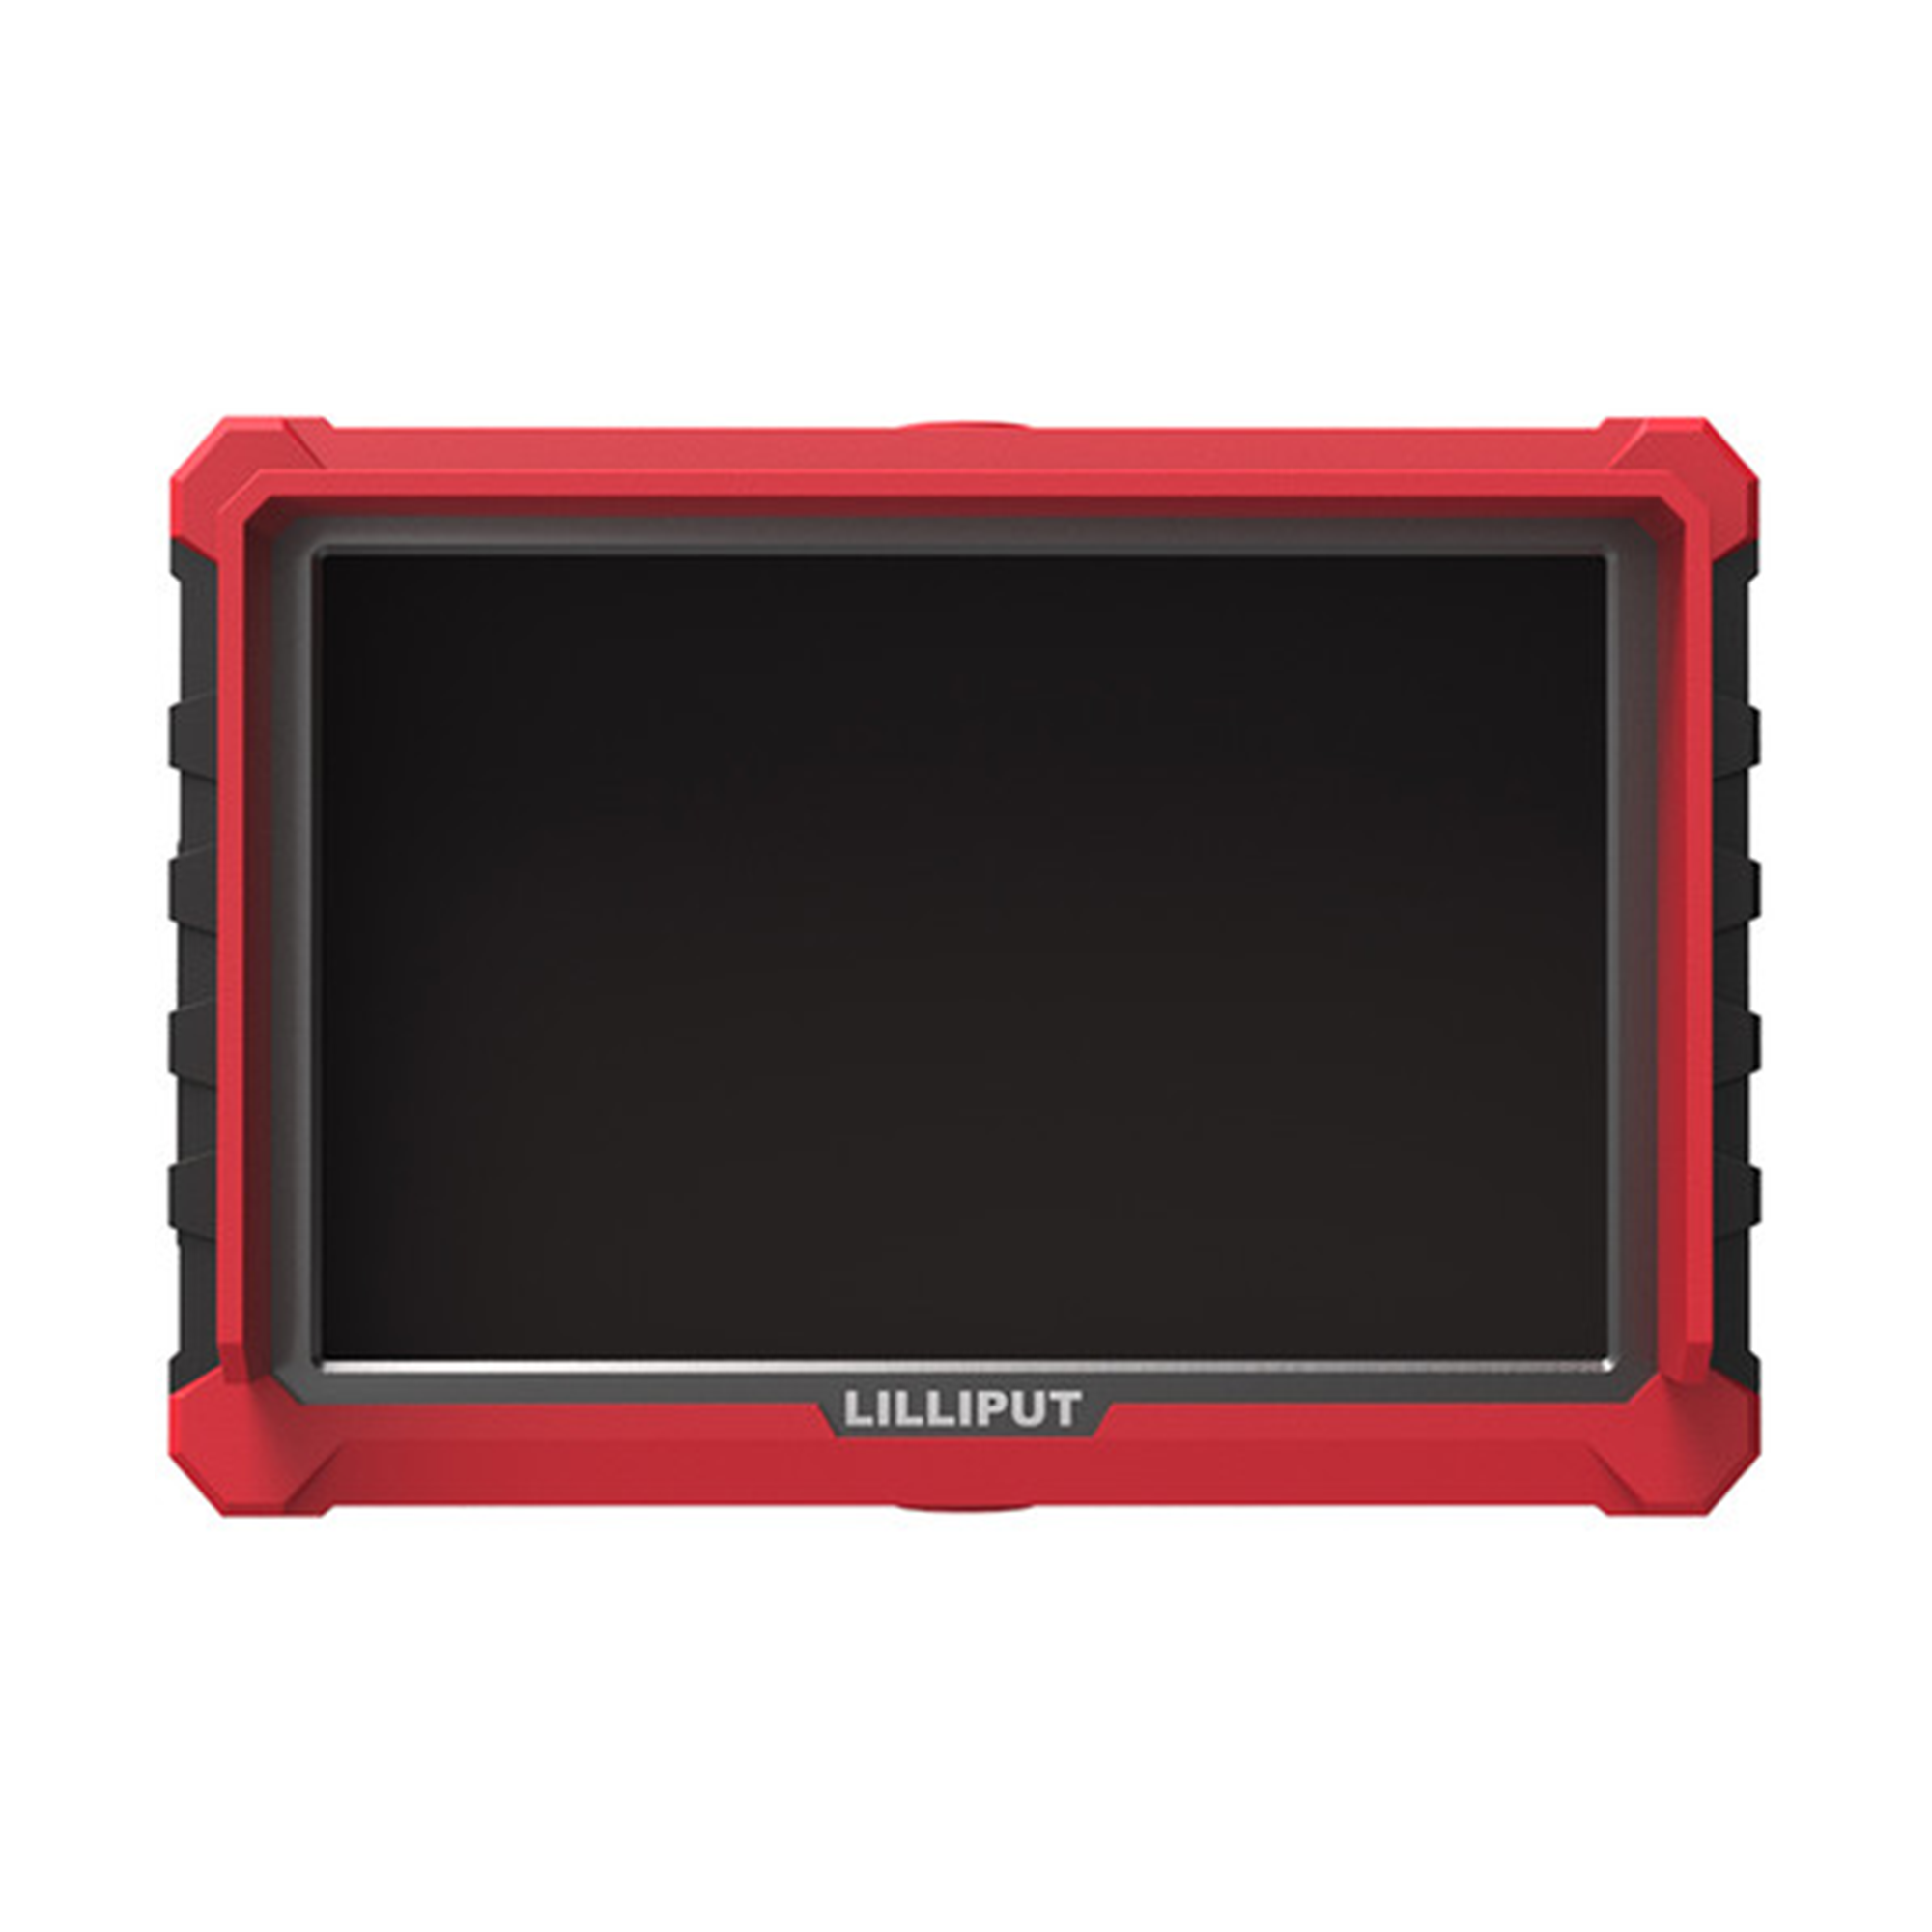 Lilliput A7S 7" Full HD Monitor with 4K Support (Red Case)